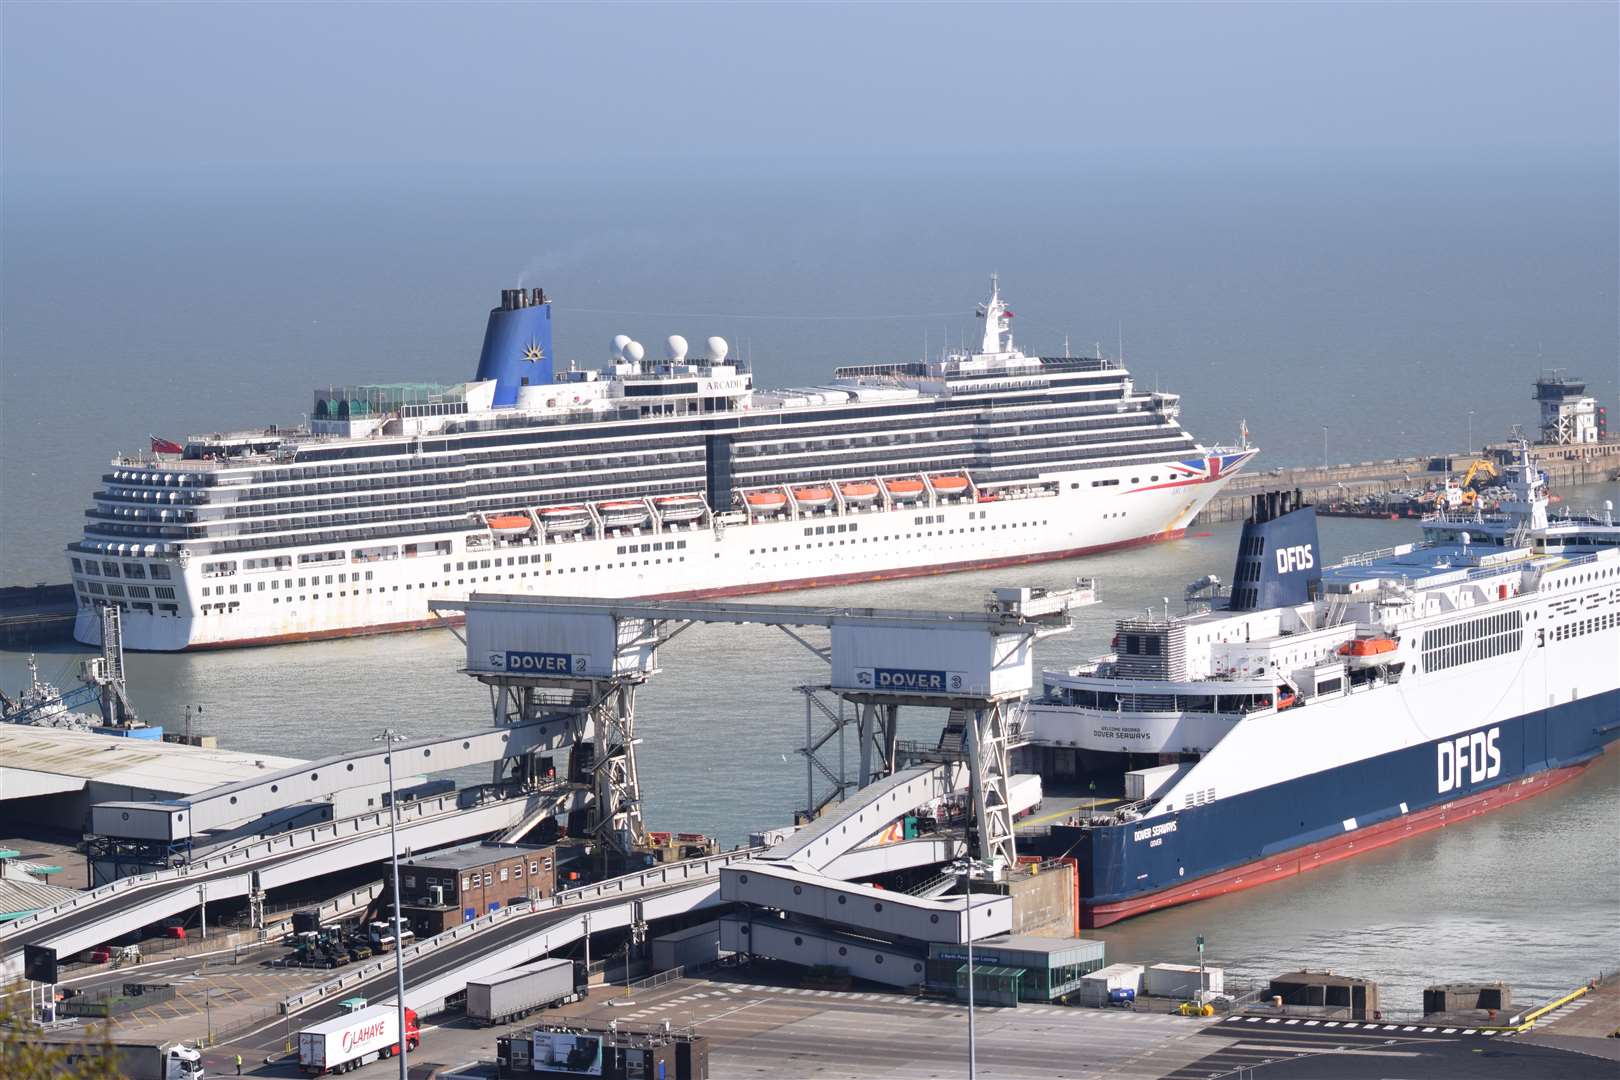 P&O Cruises Arcadia on warm lay up beside the ferry berths at Dover Eastern Docks during the lockdown